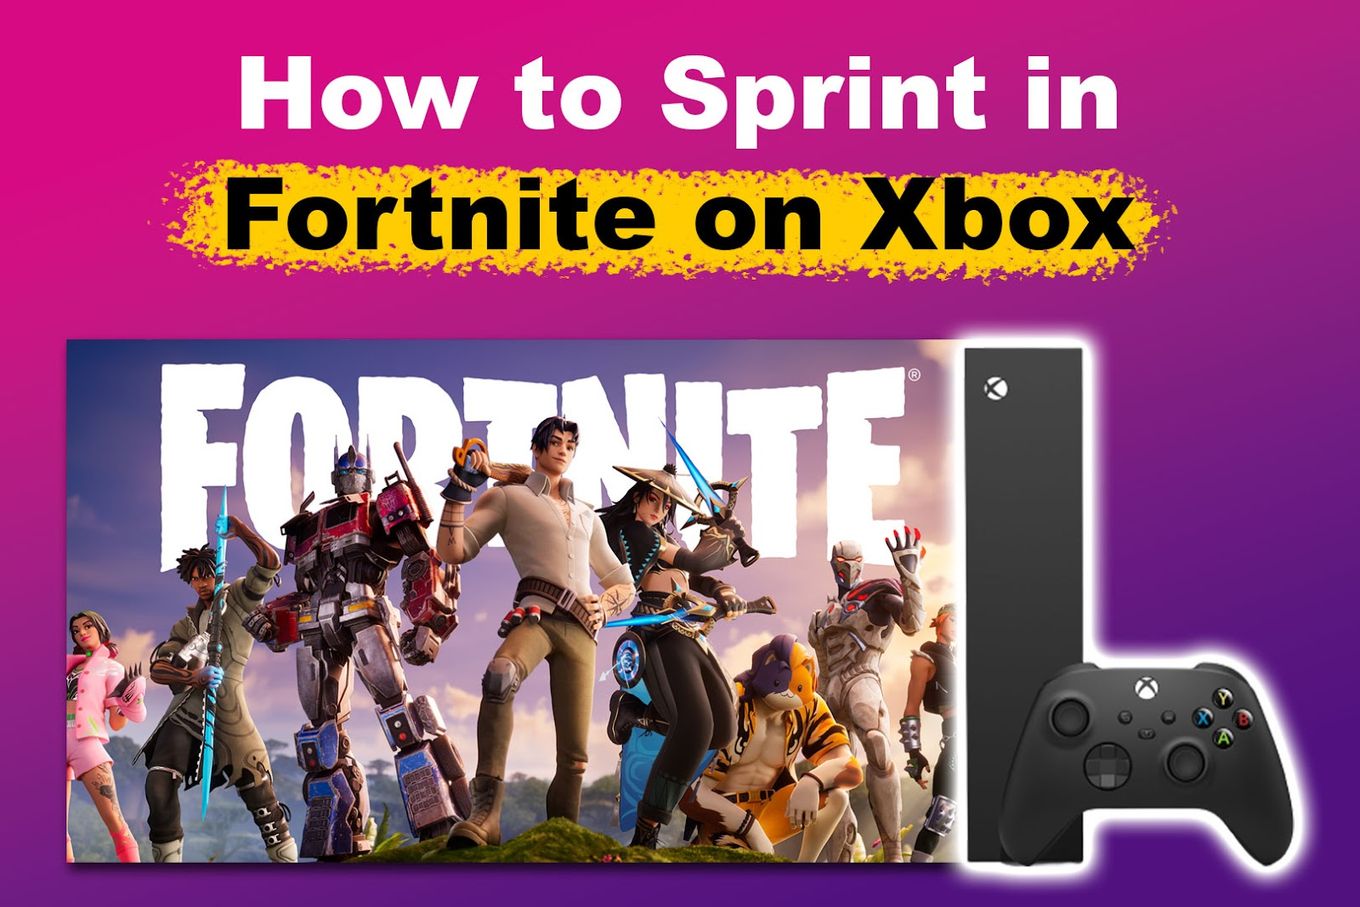 How to Sprint in Fortnite on Xbox